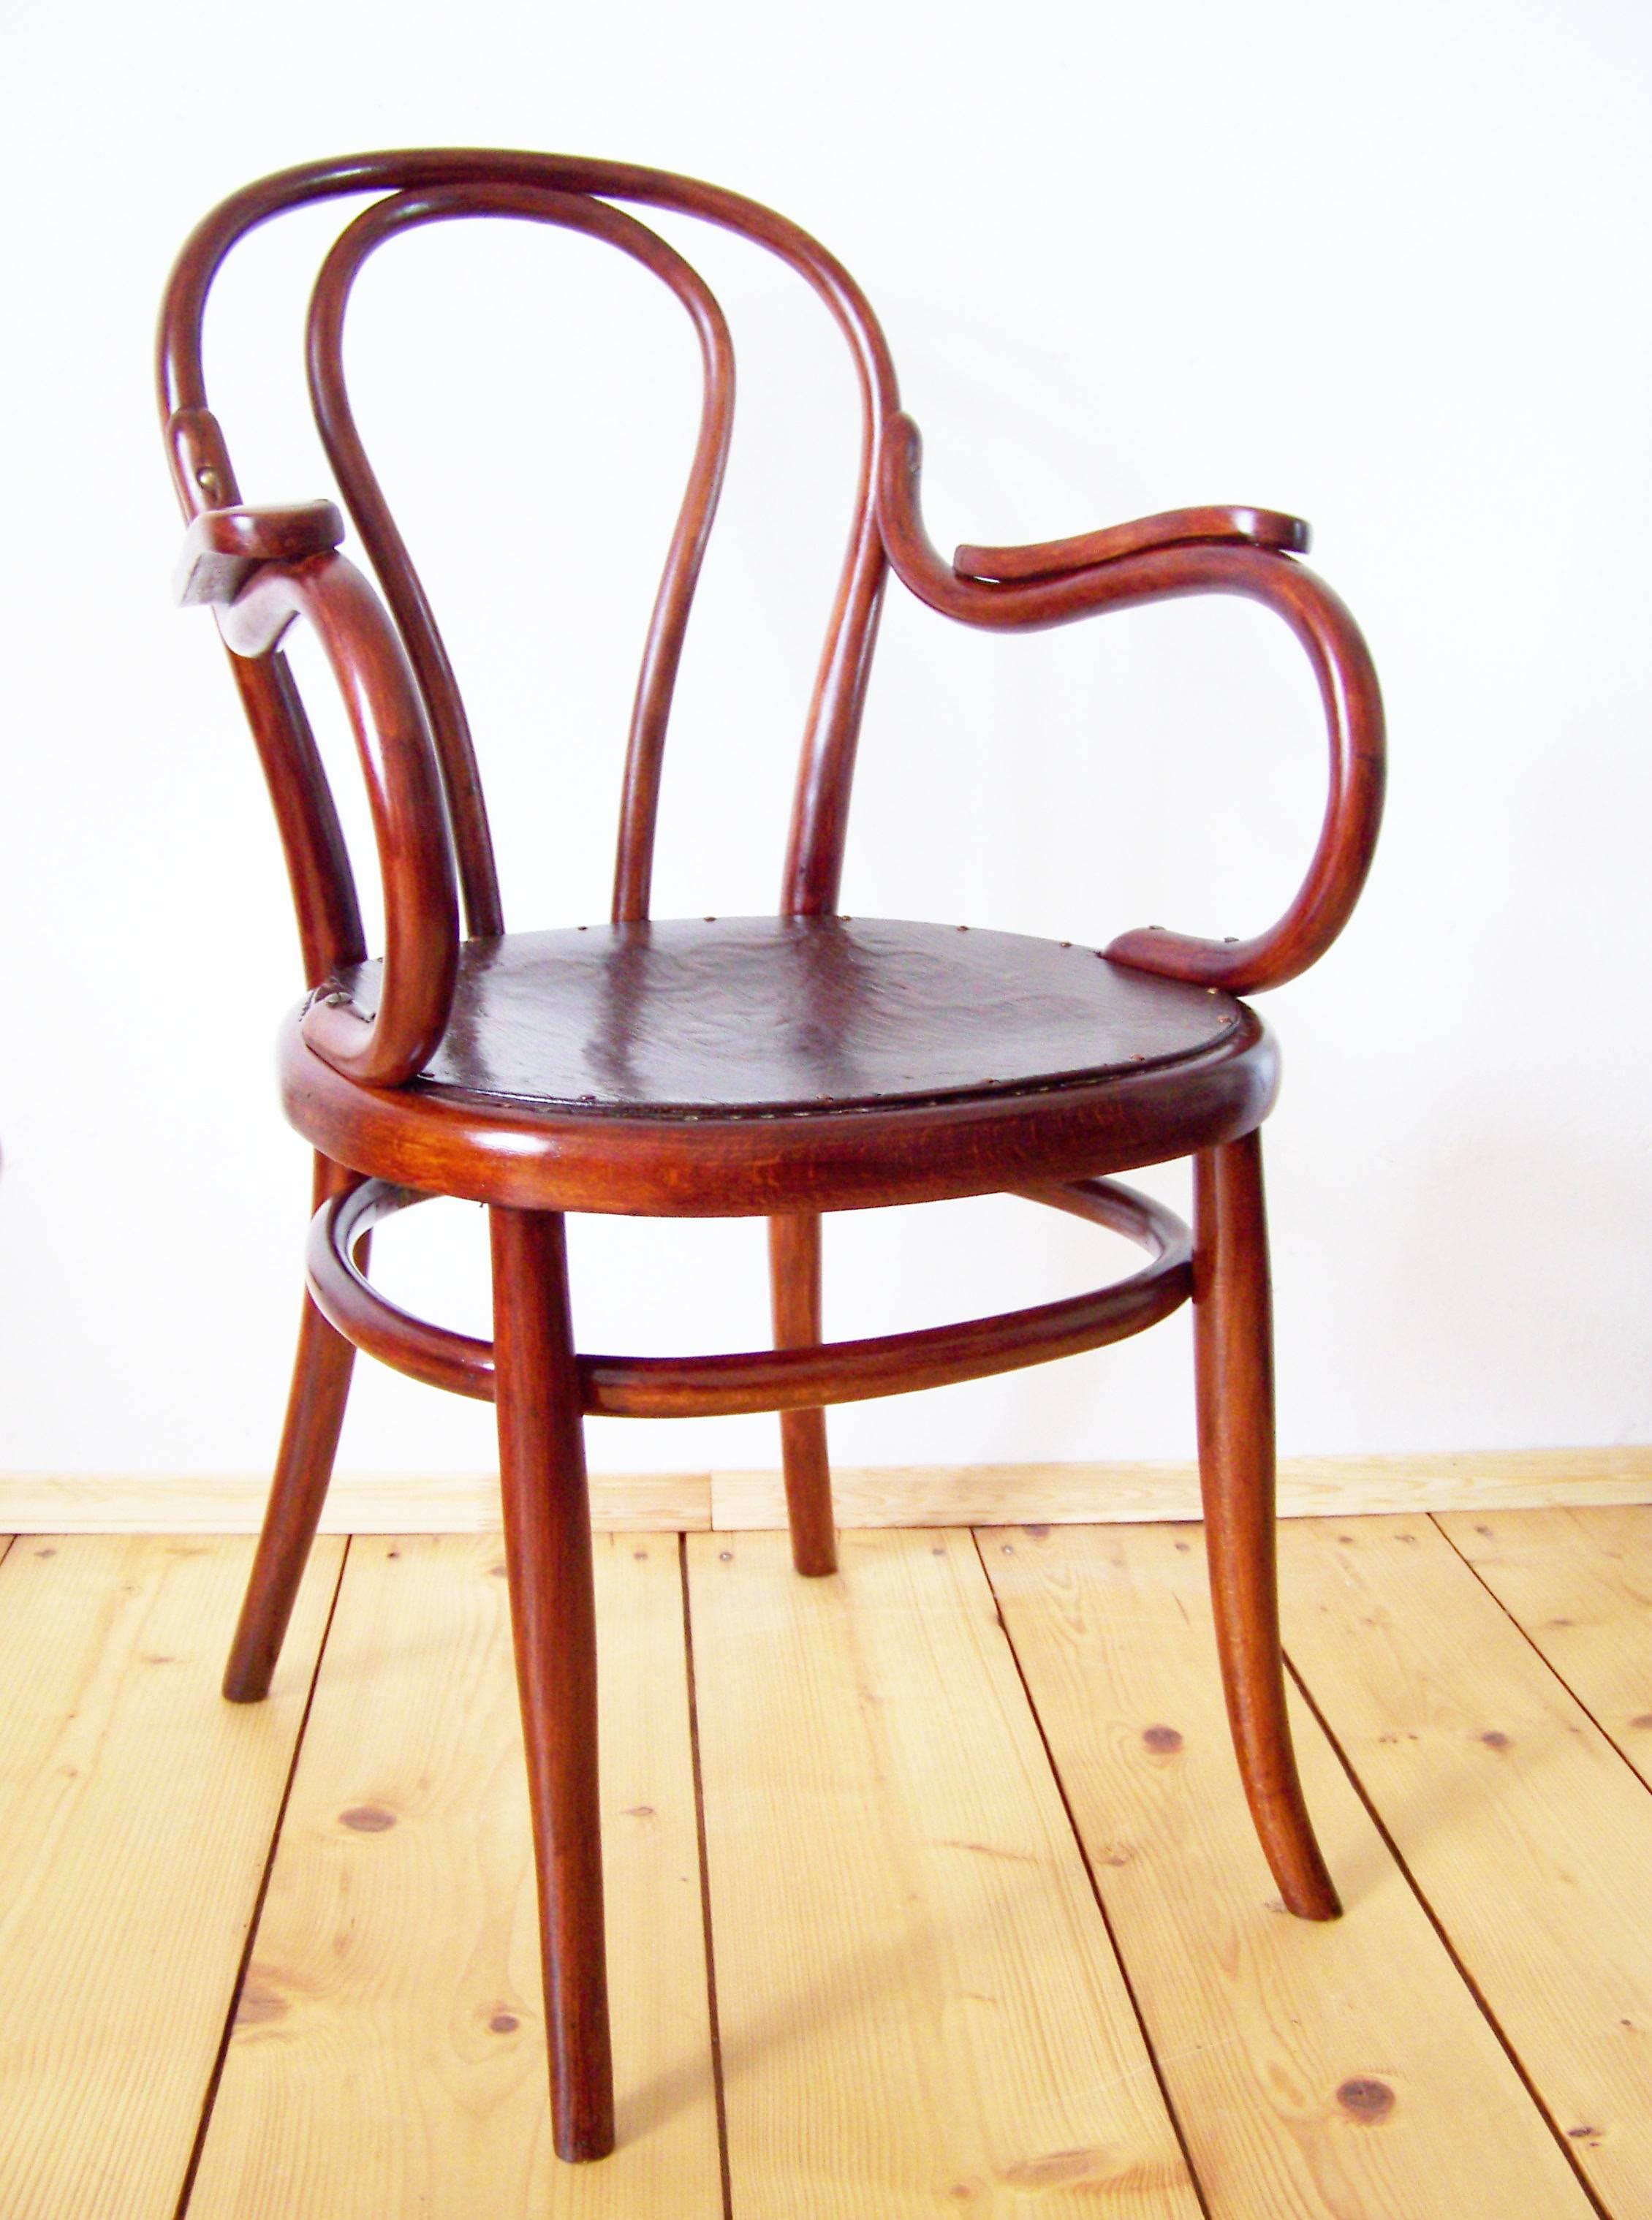 Armchair was included in the production program of the company Gebrüder Thonet in 1876. Marked with stamp Thonet, which is used between years 1861 and 1881. Original restored polish, stringed seat replaced with a plywood board with decor.